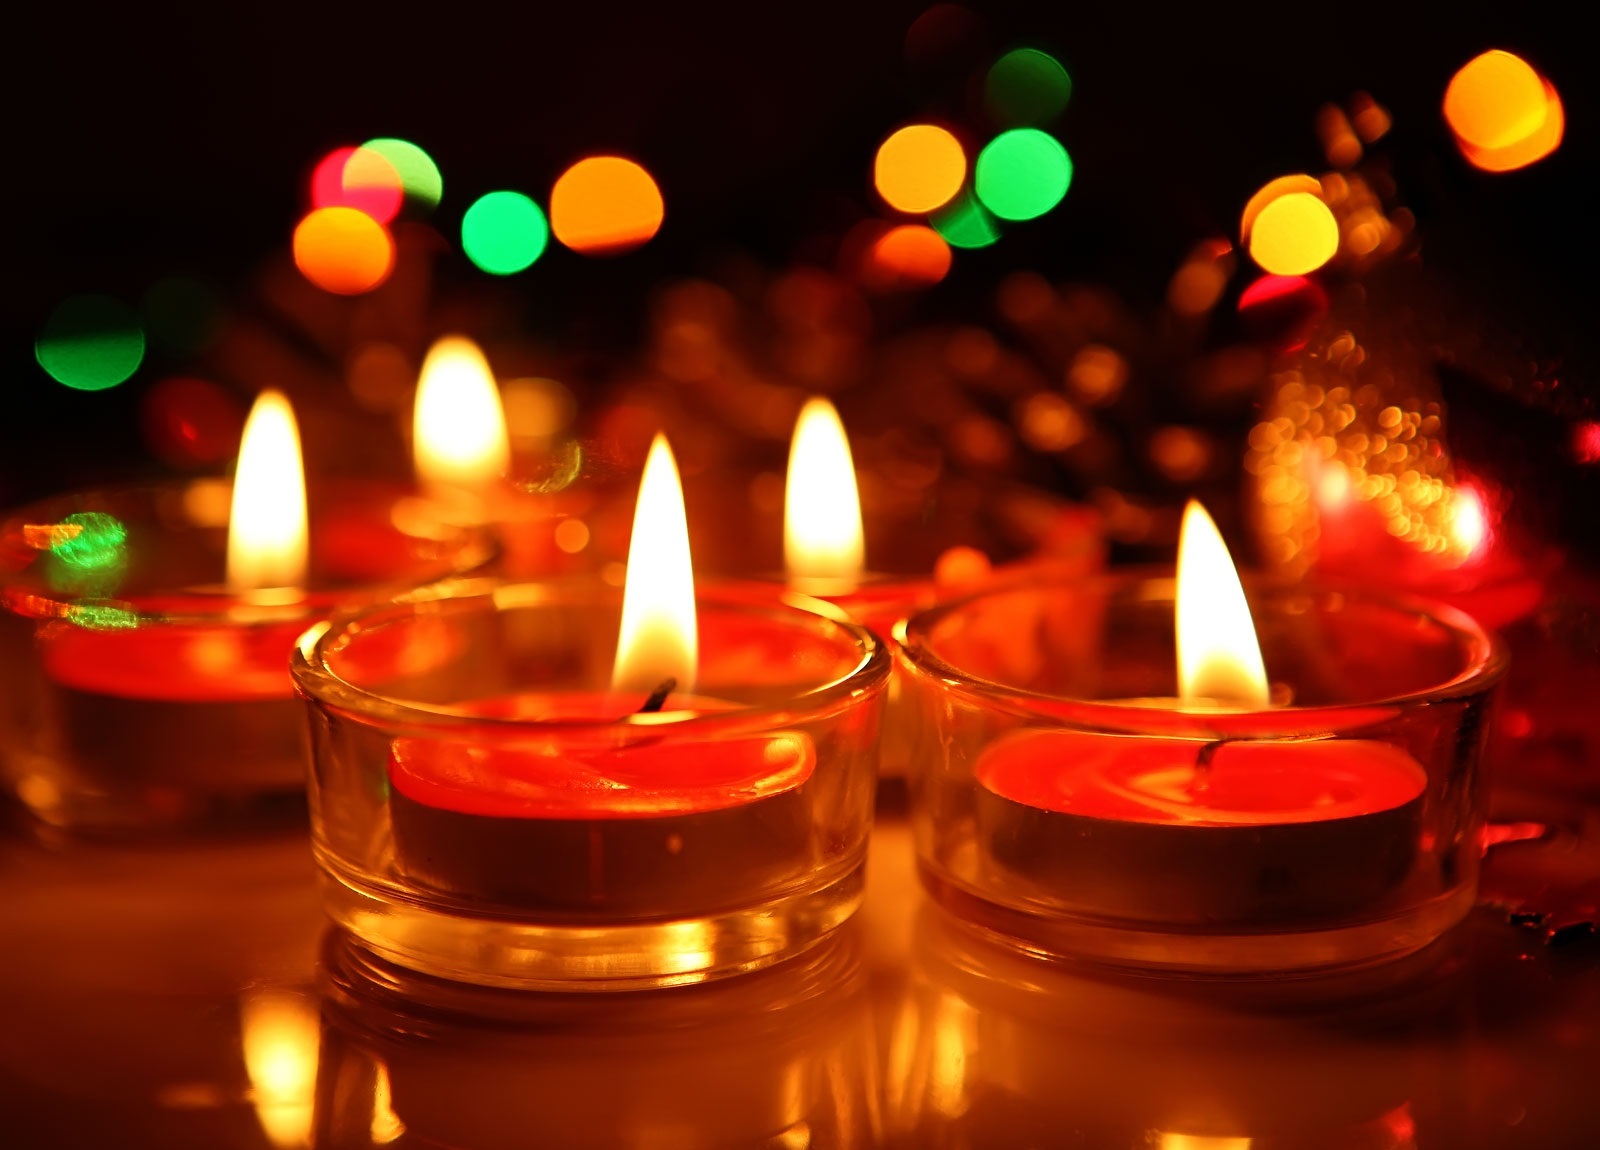 Latest Awesome Diwali HD Wallpapers For Desktop, PC, Laptop ...